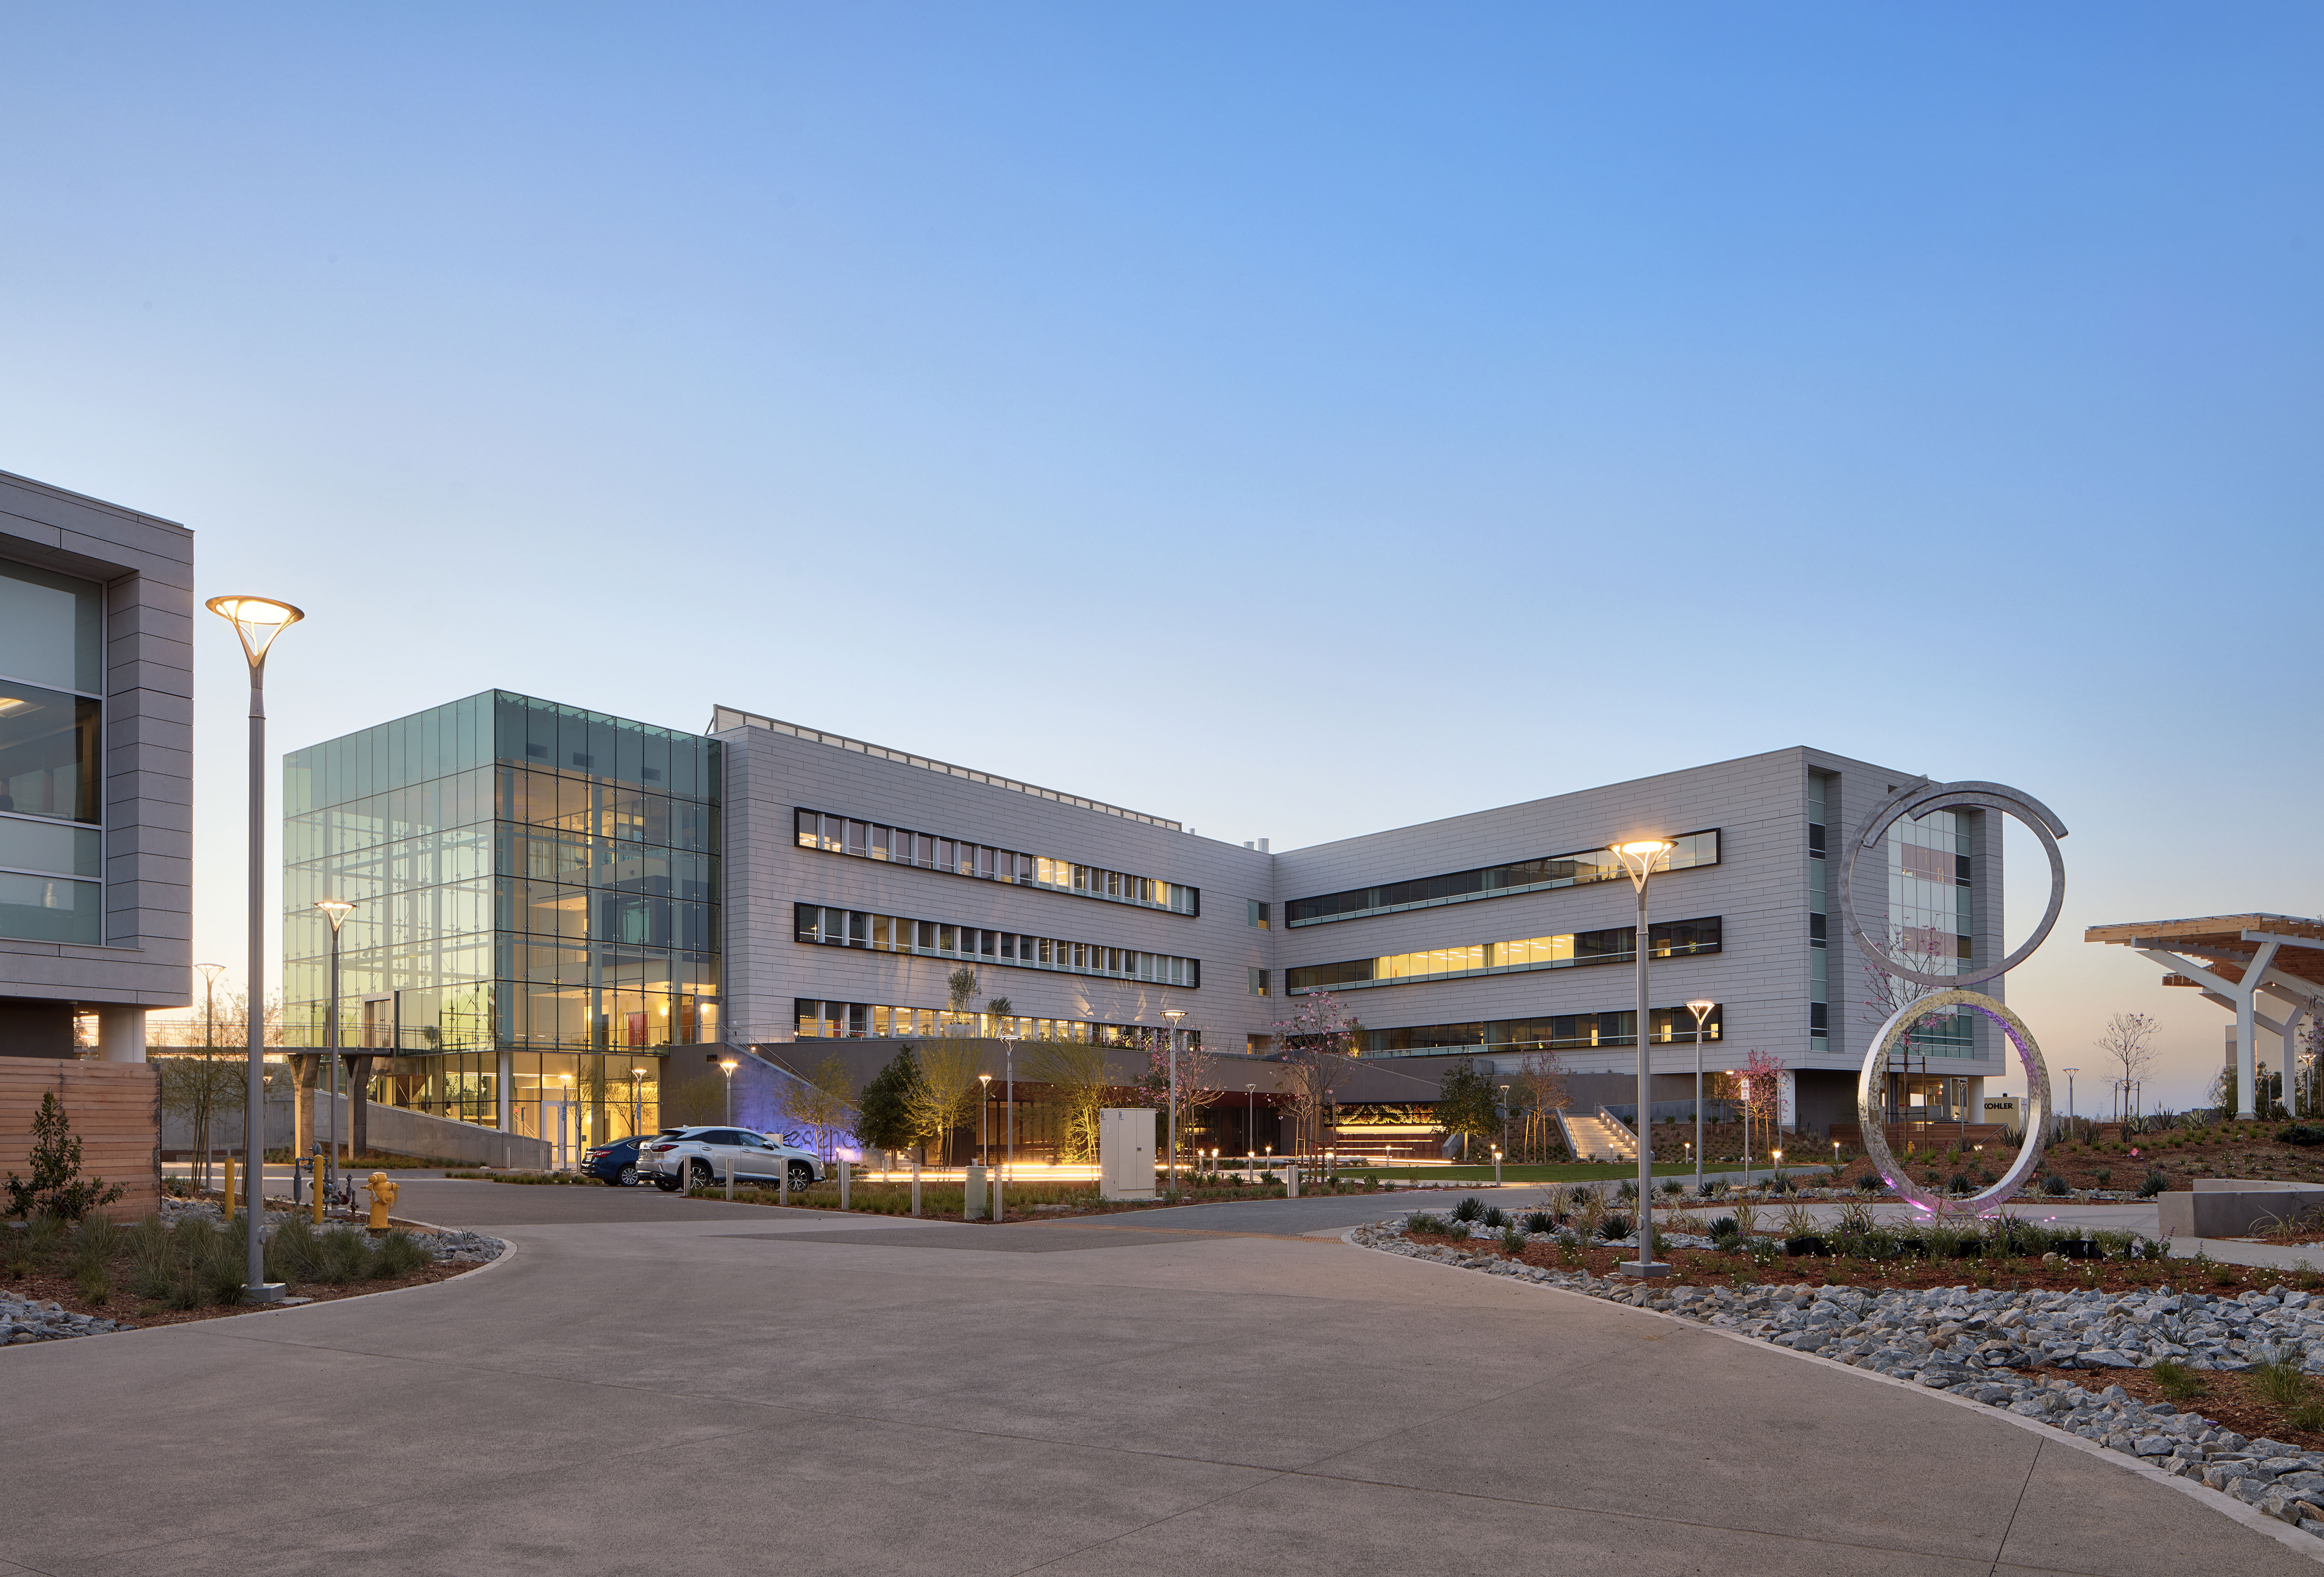 The largest occupancy stemmed from the completion of BioLegend’s new headquarters.